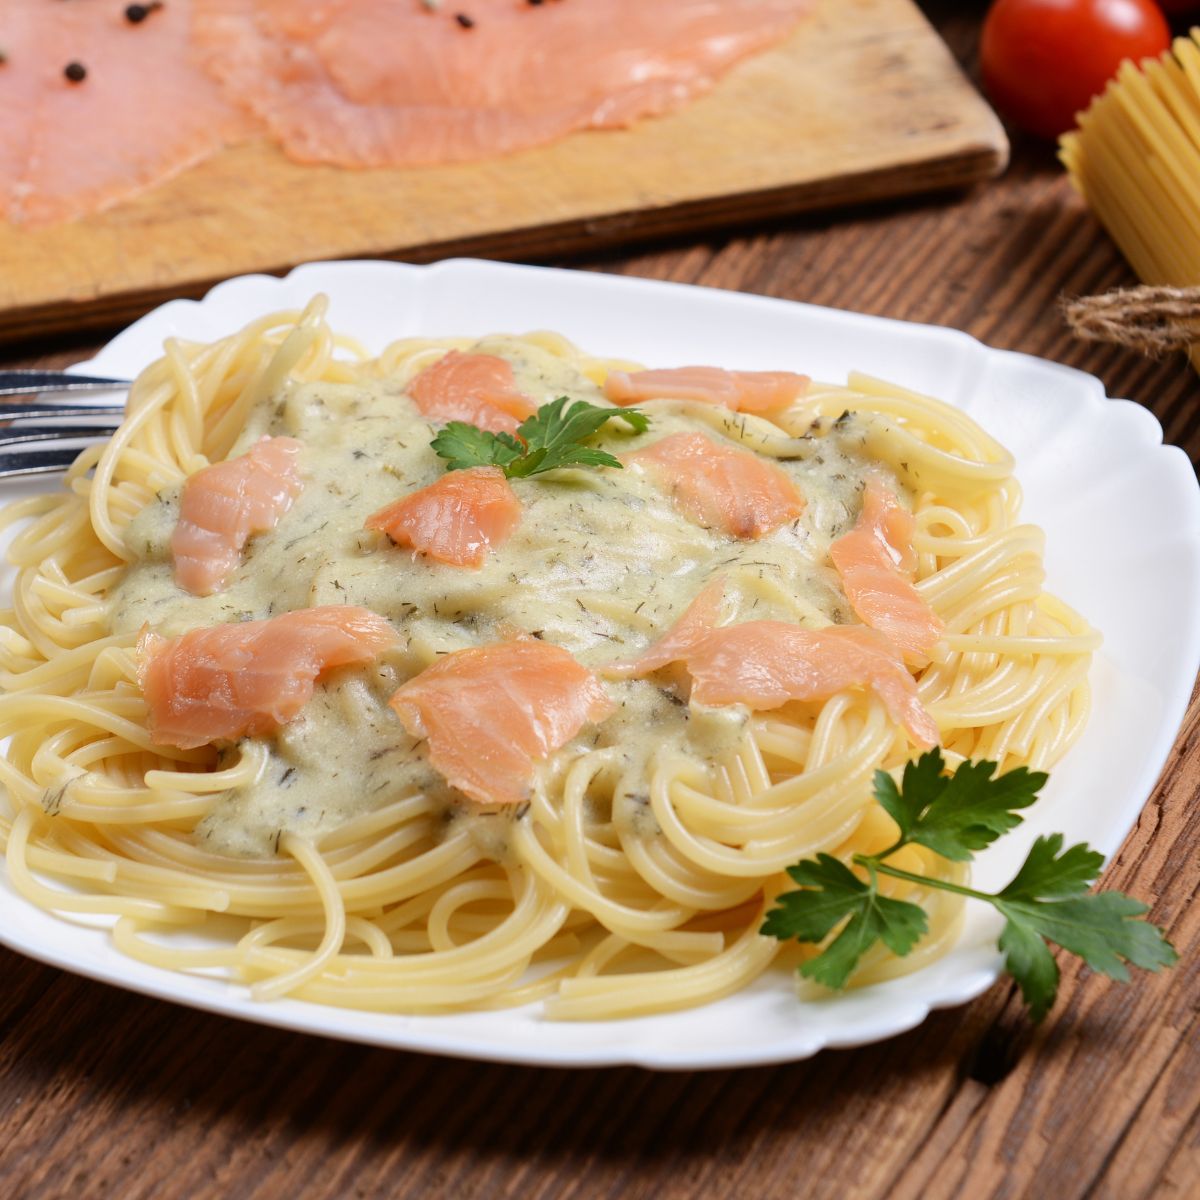 A plate of salmon and pasta.